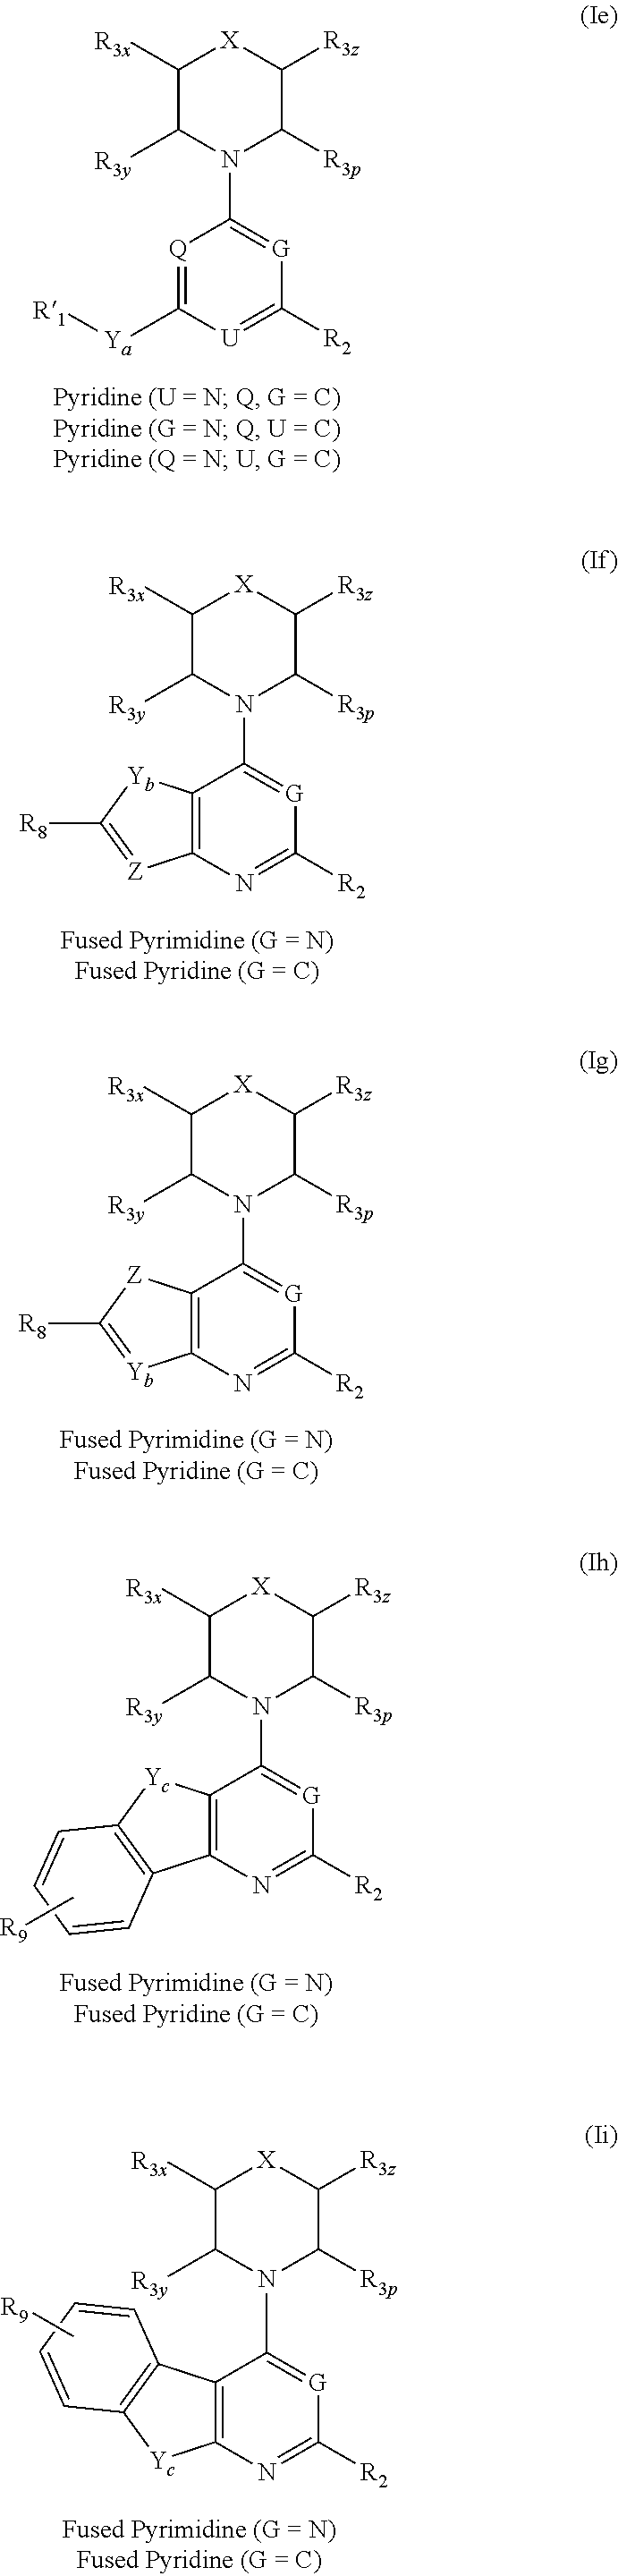 Triazine, pyrimidine and pyridine analogs and their use as therapeutic agents and diagnostic probes